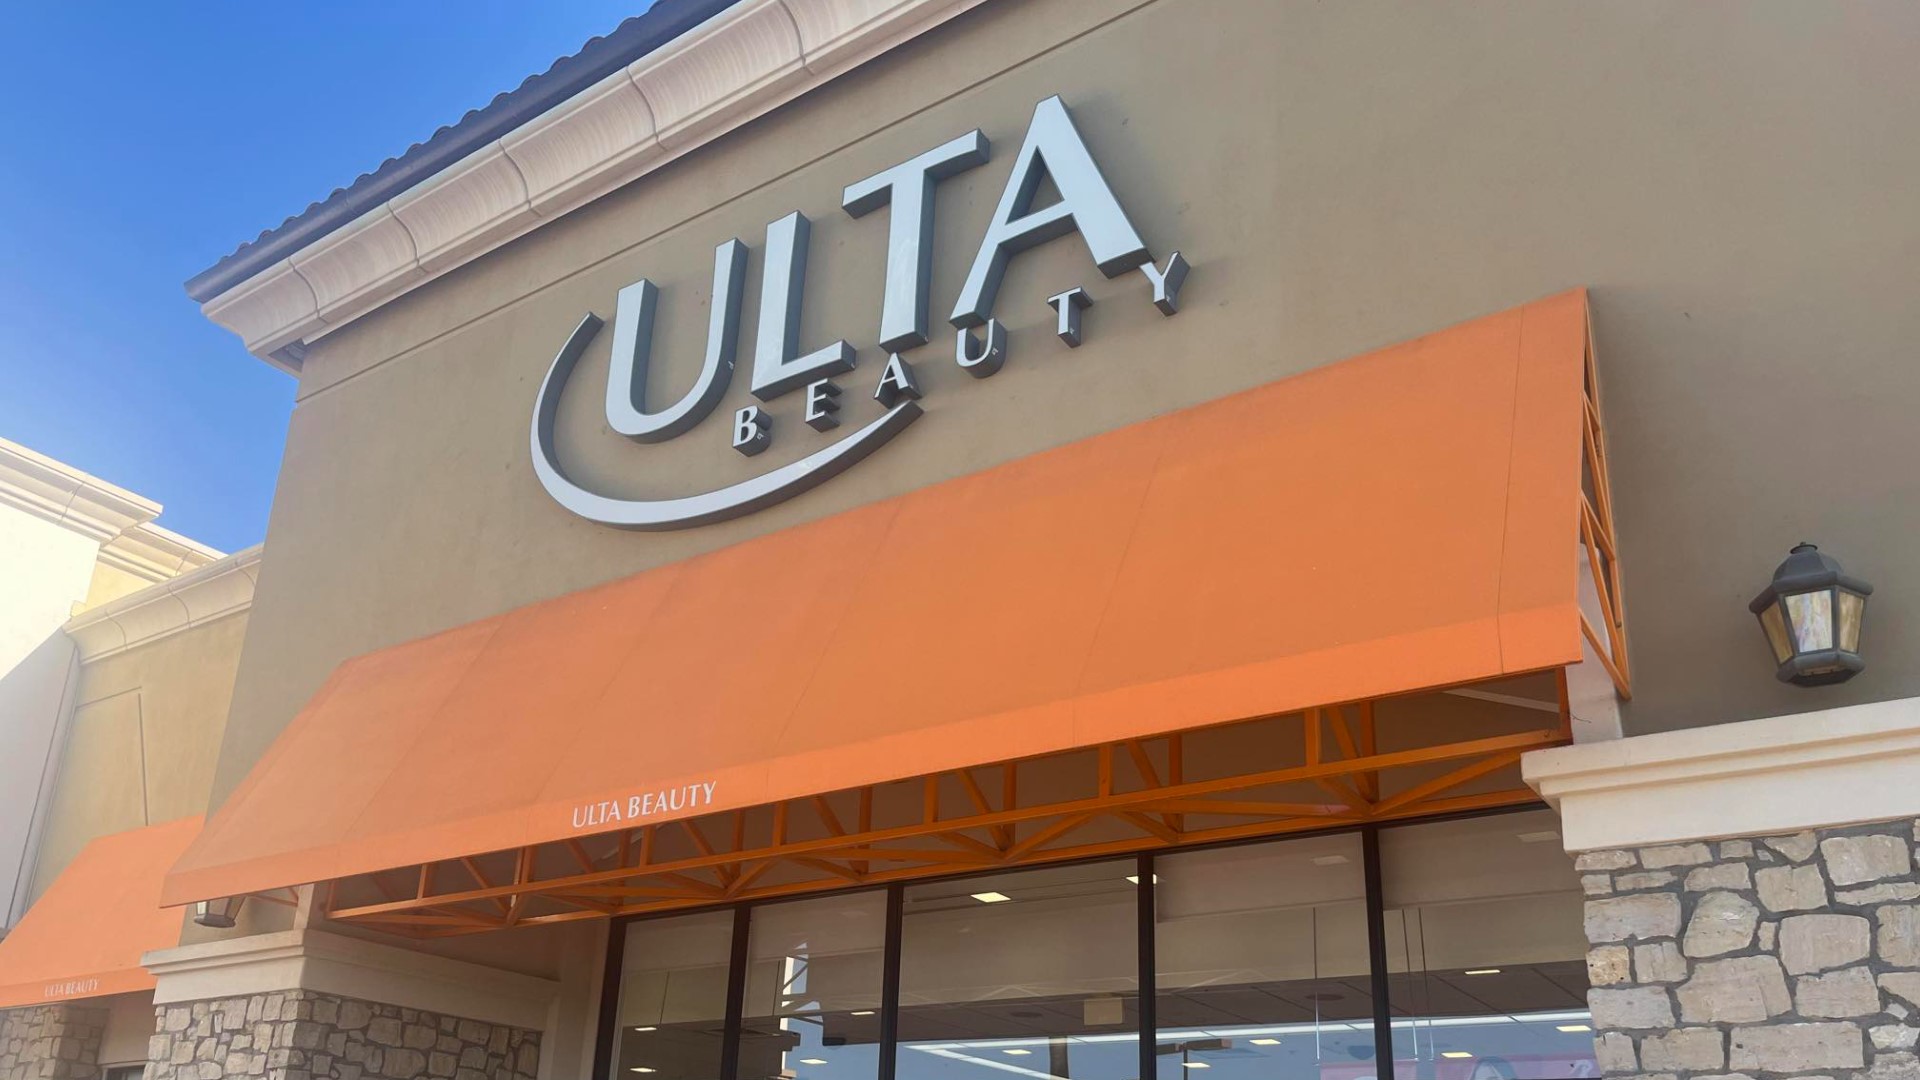 The Bonsall woman is accused of flying shoplifters across the nation to steal from Ulta stores and then sell the items online.